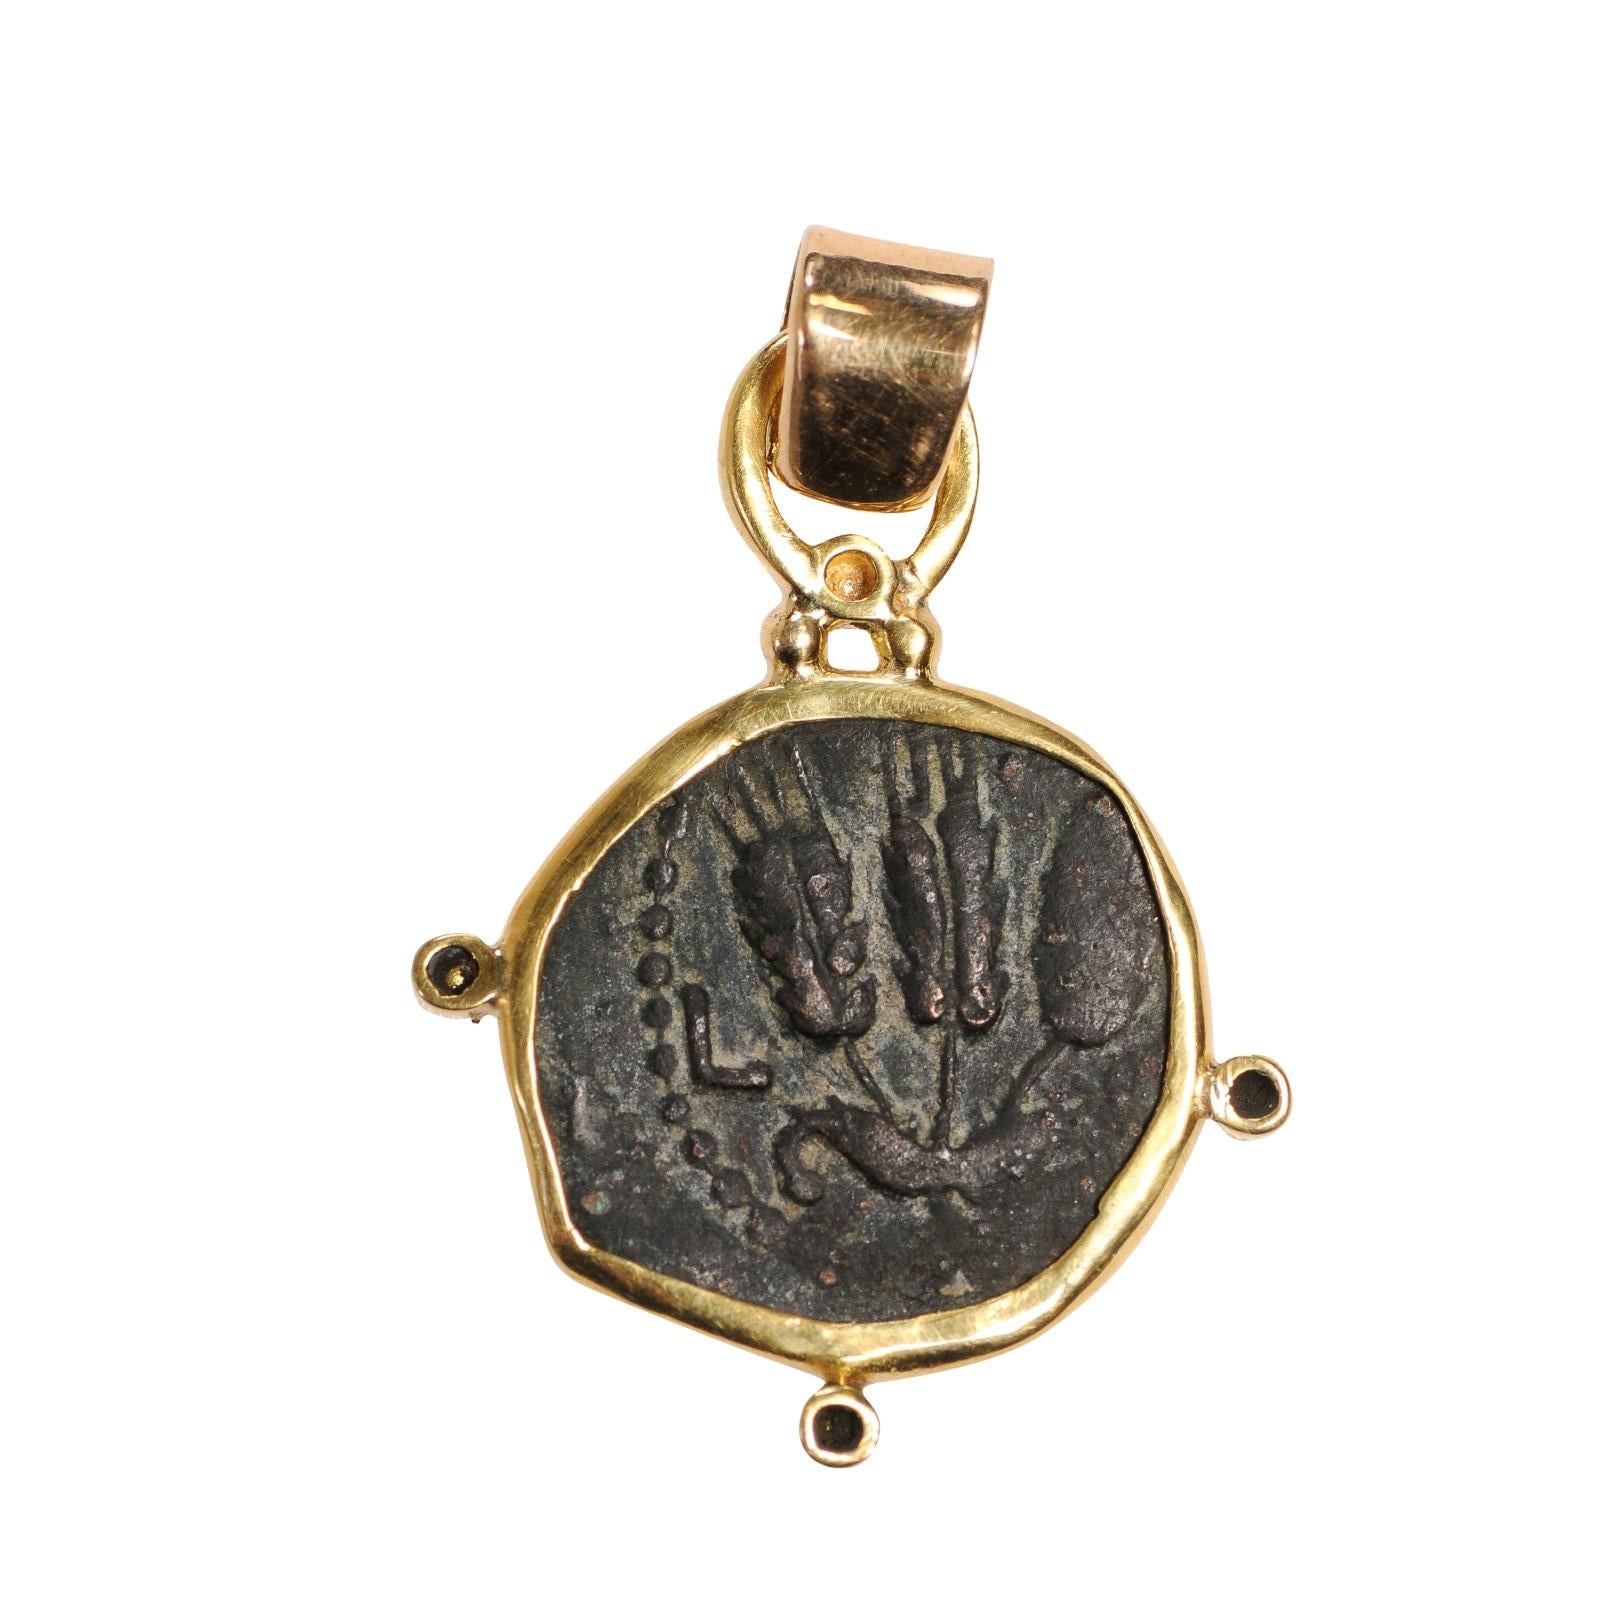 An Authentic Roman Bronze Widow's Mite Coin, Judaea, Herodians Agrippa I (37-44 AD) Prutah, Jerusalem Mint, set in a custom 22k gold bezel with 22kt gold bail. The obverse, or front, side of this coin features 3 ears of grain. On the reverse side